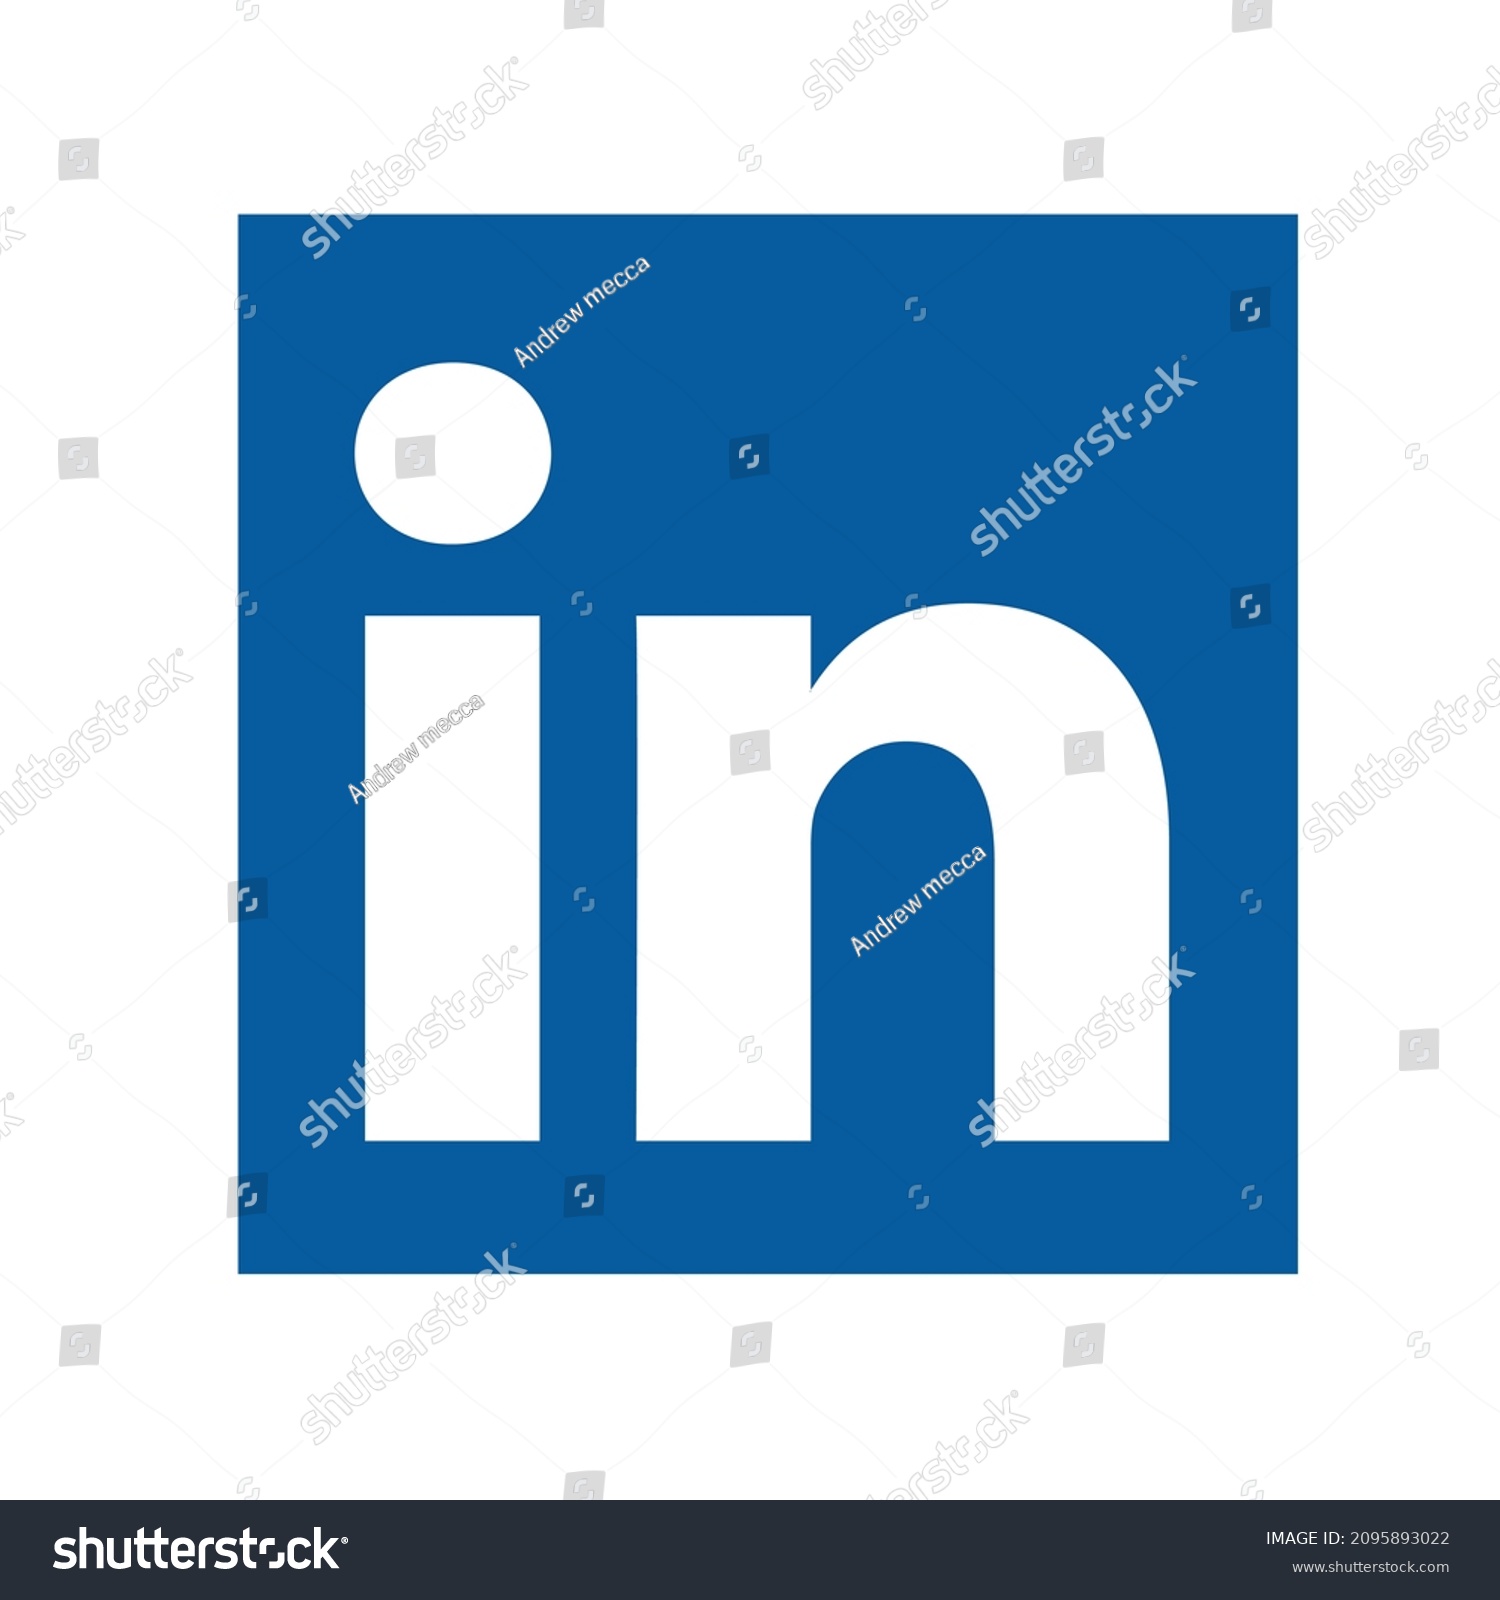 square blue colour white background LinkedIn design logo sign symbol vector in American business and employment oriented online service operates via websites and mobile apps #2095893022